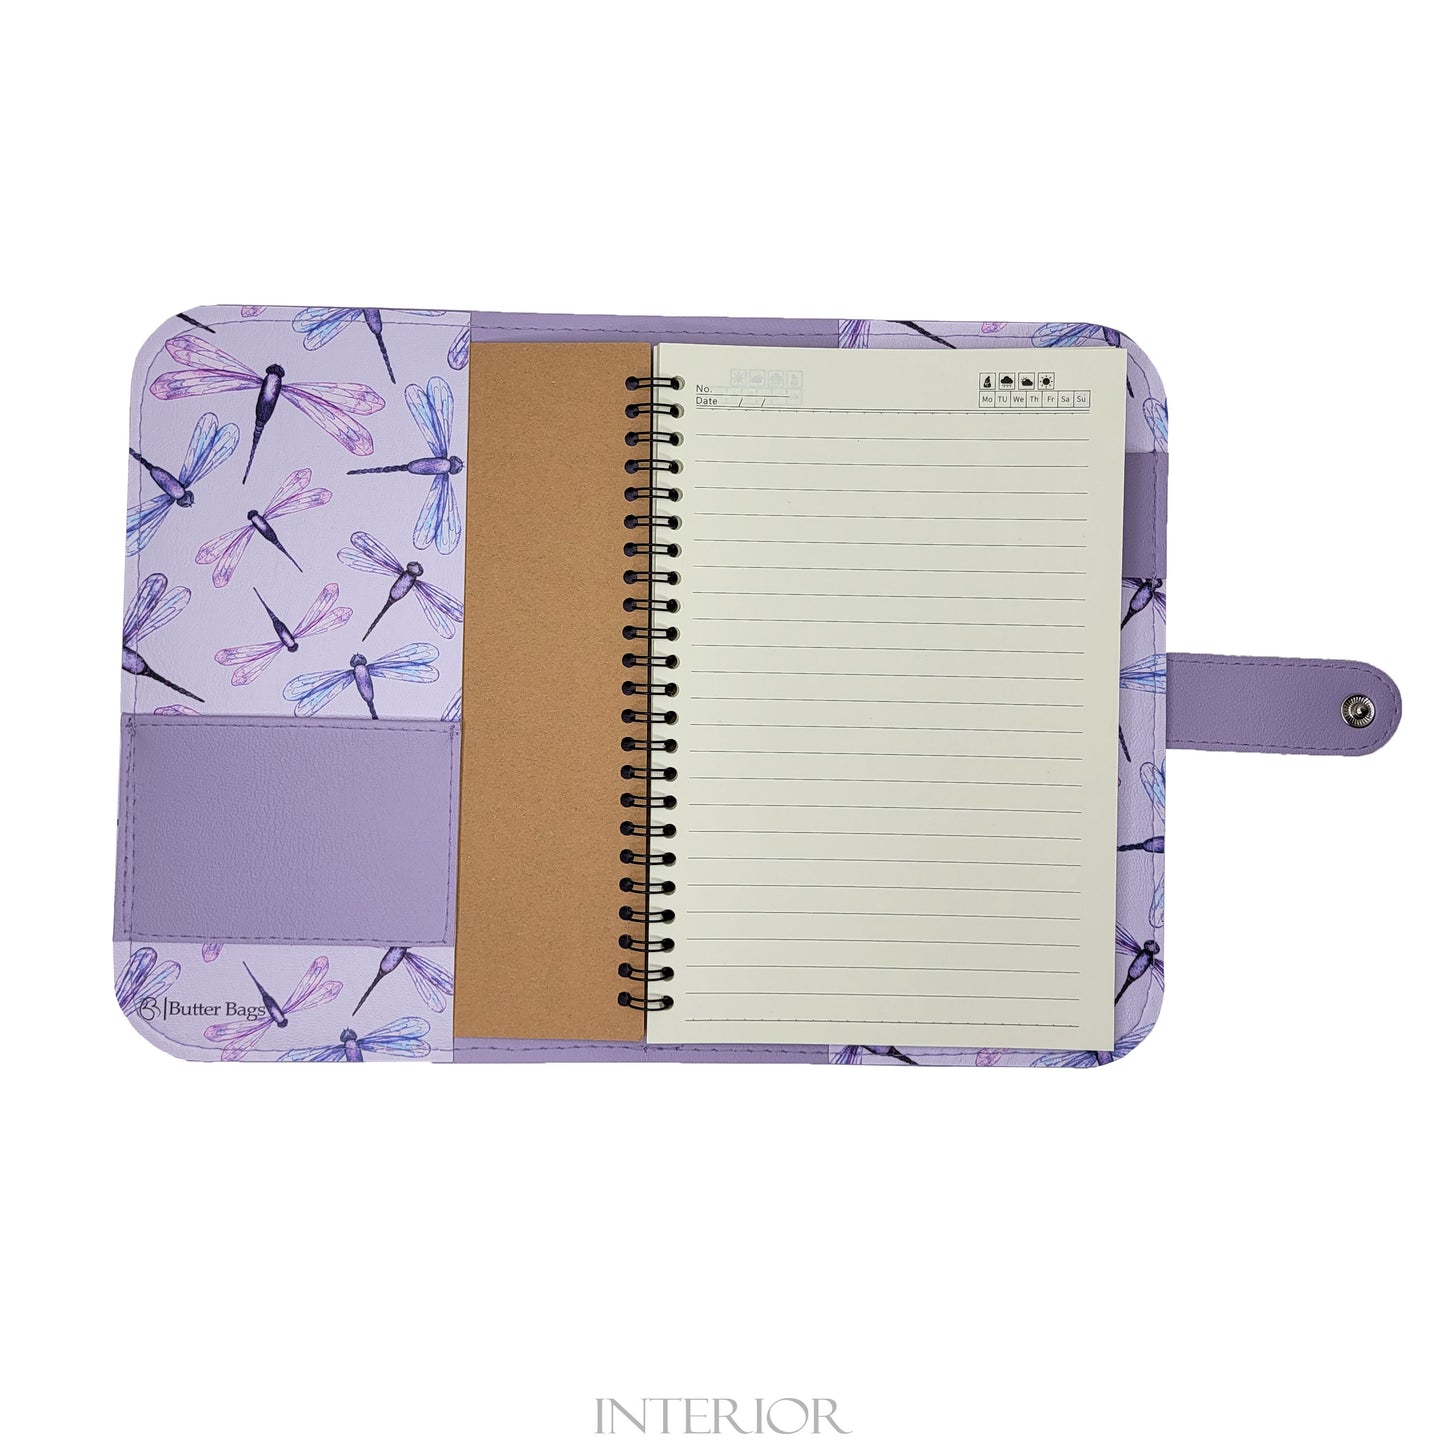 Dragonfly- Notebook & Cover (light purple)